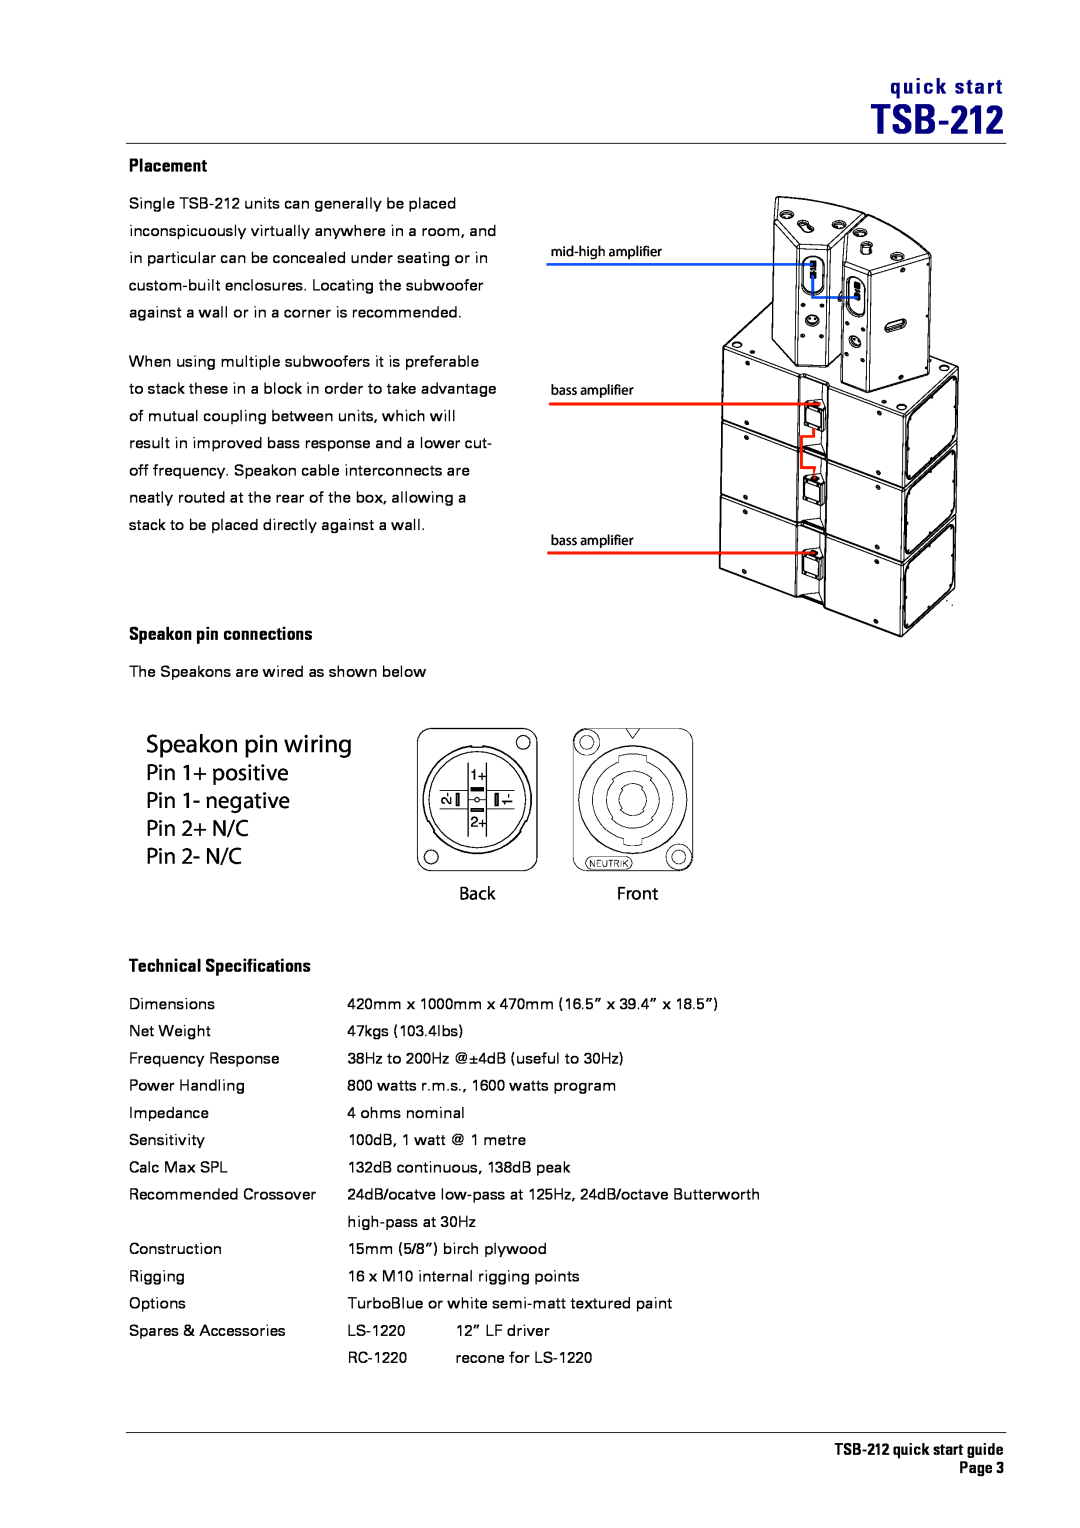 Turbosound TSB-212 Placement, Speakon pin connections, Technical Specifications, Speakon pin wiring, Pin 2- N/C, Back 